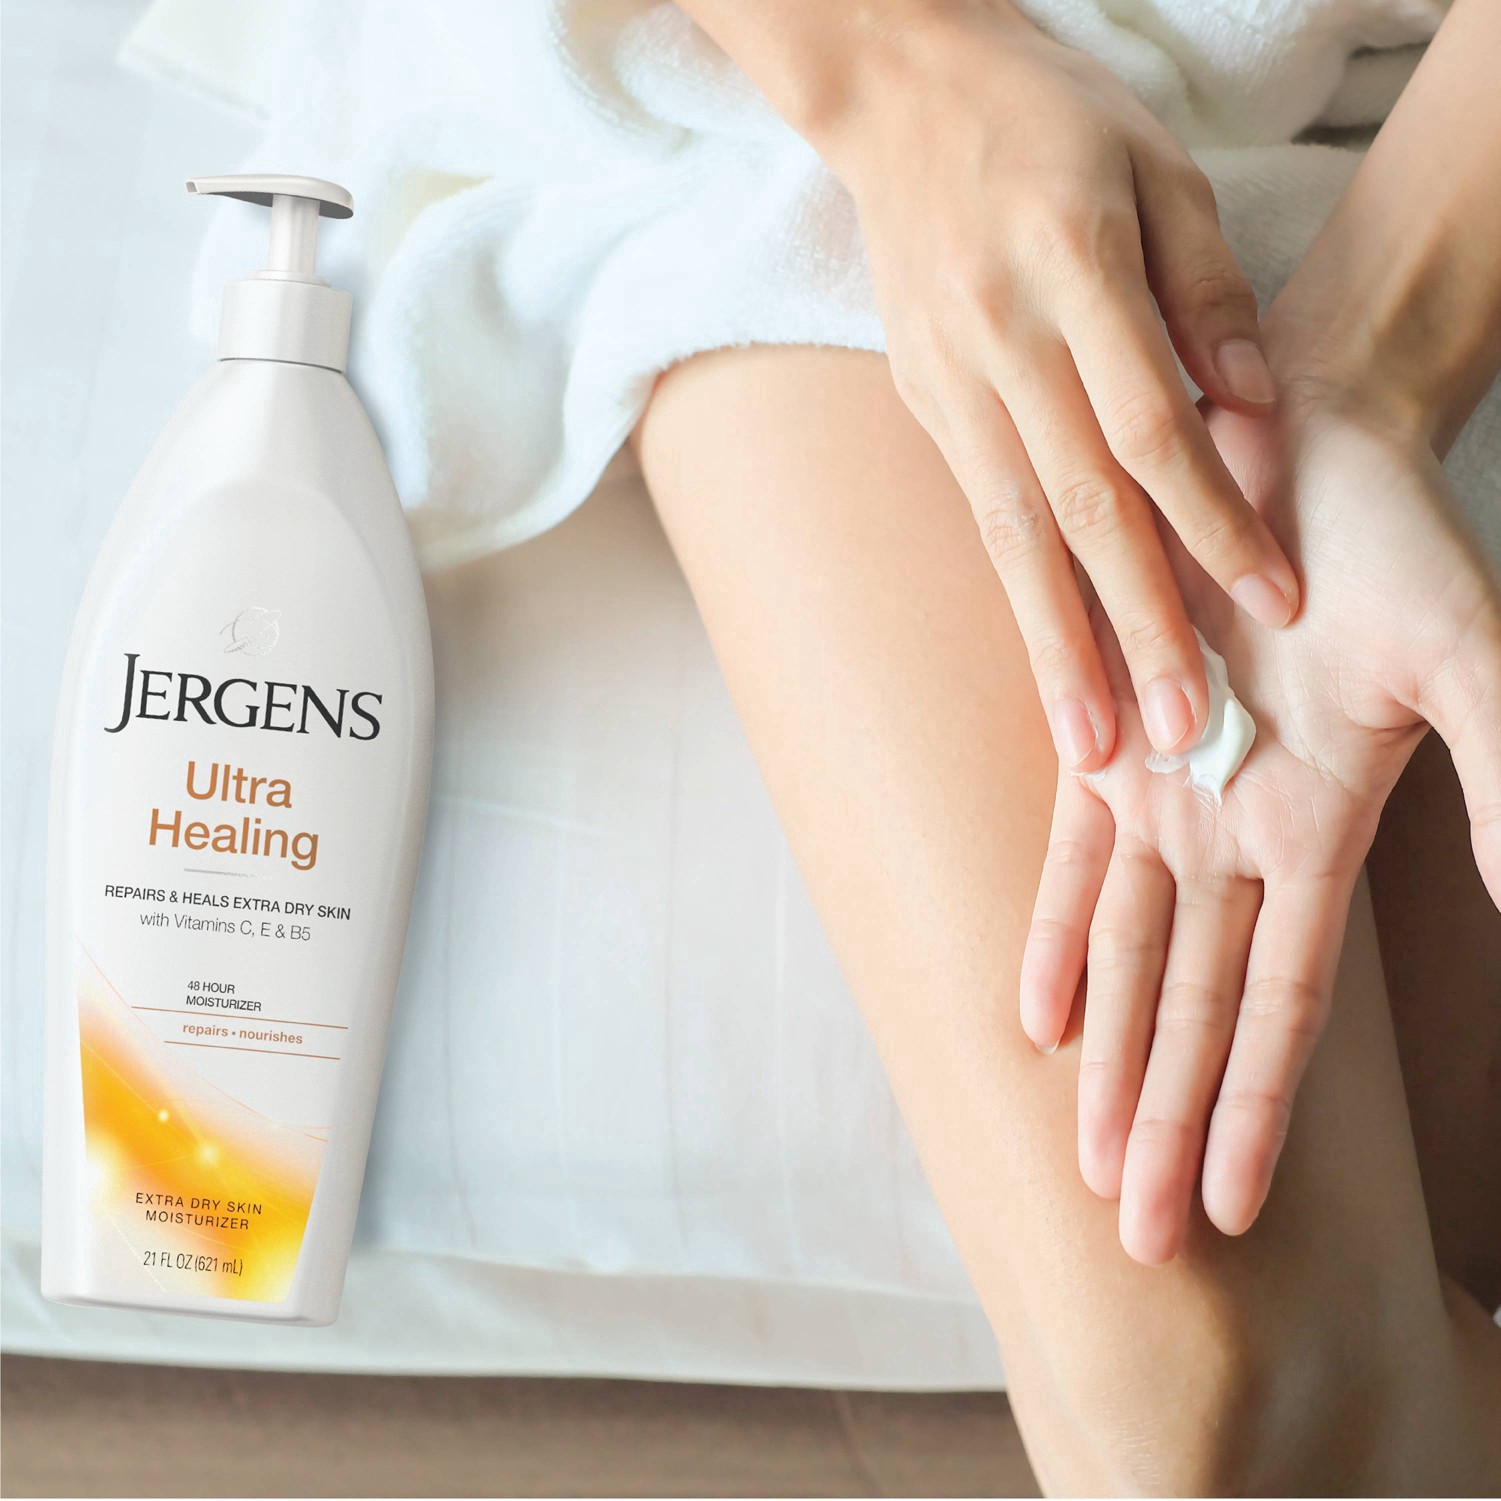 slide 16 of 67, Jergens Hand and Body Lotion, Dry Skin Moisturizer with Vitamins C,E, and B5, 21 fl oz